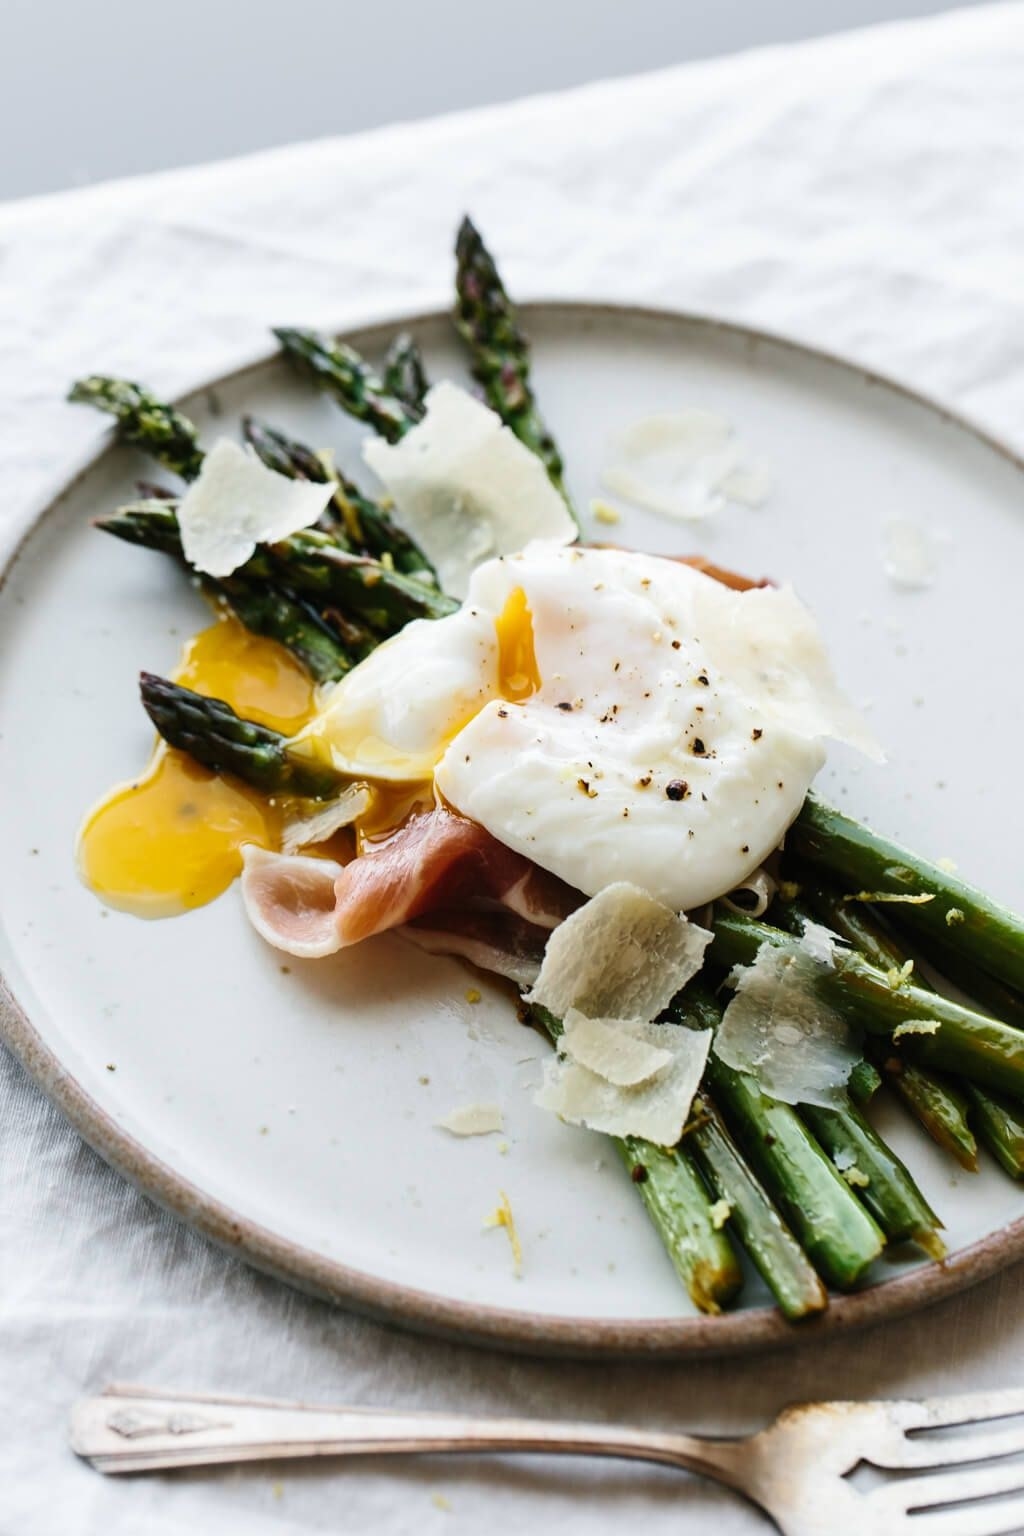 Asparagus topped with cured meat and poached egg.